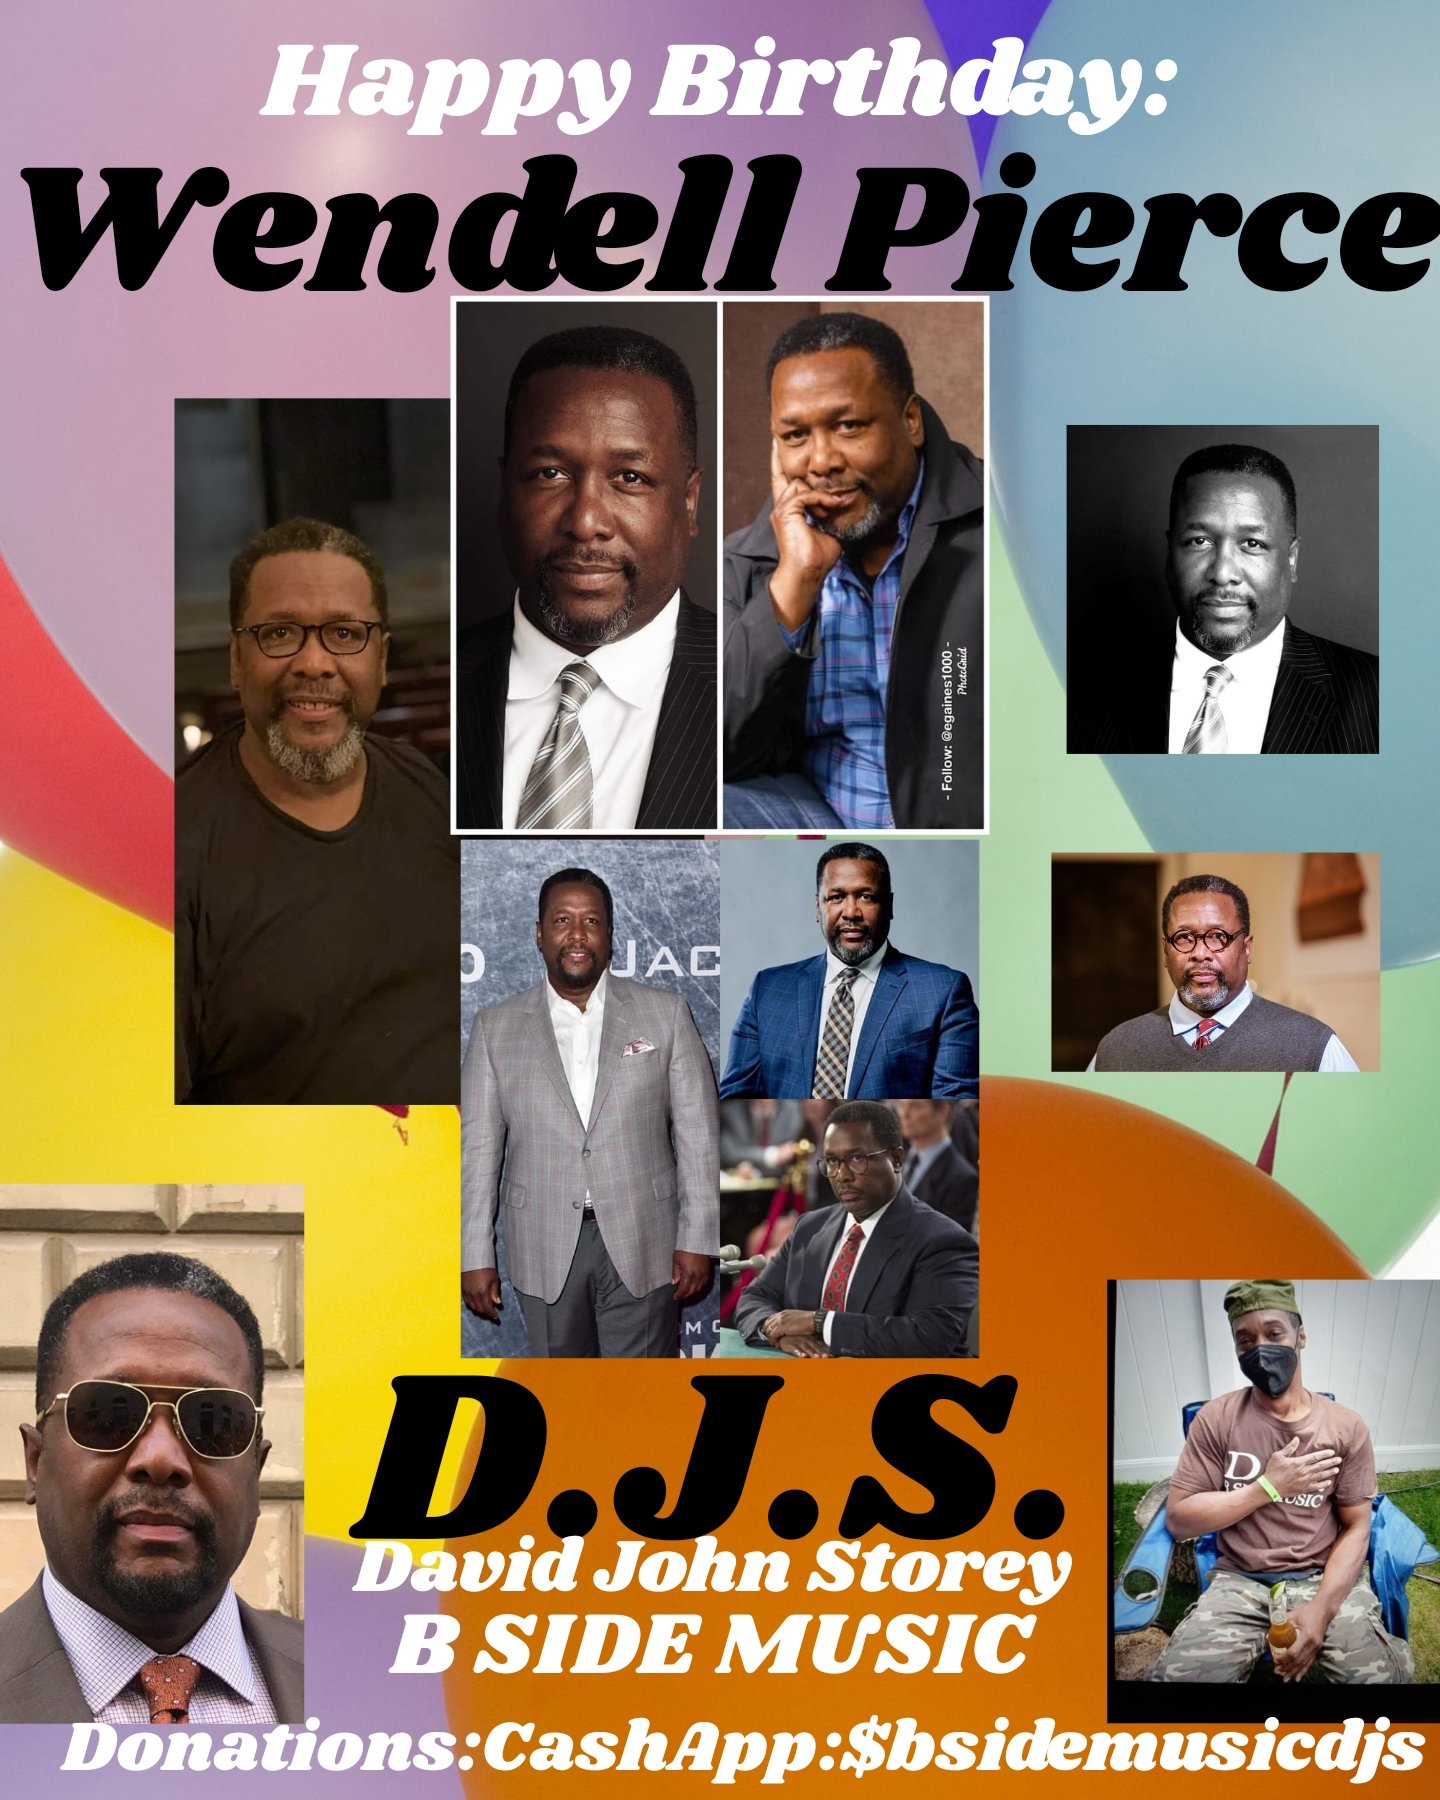 I(D.J.S.)\"B SIDE\" saying Happy Birthday to Actor: \"WENDELL PIERCE\"!!!! 